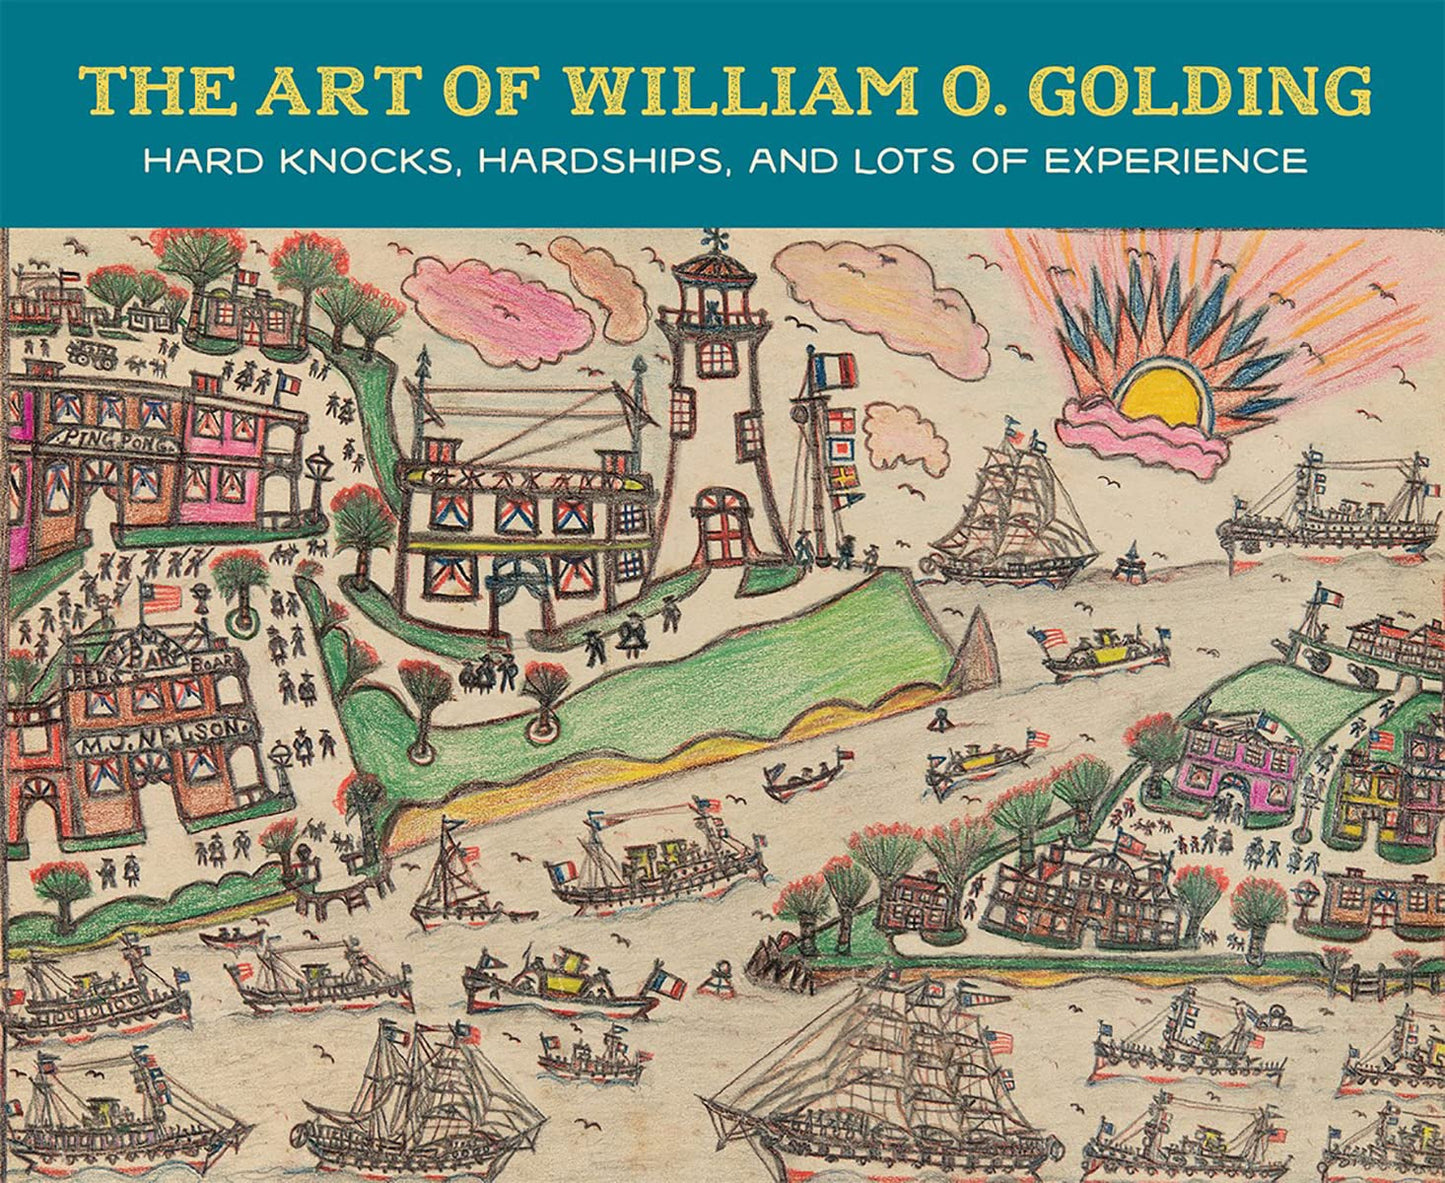 The Art of William O. Golding: Hard Knocks, Hardships, and Lots of Experience